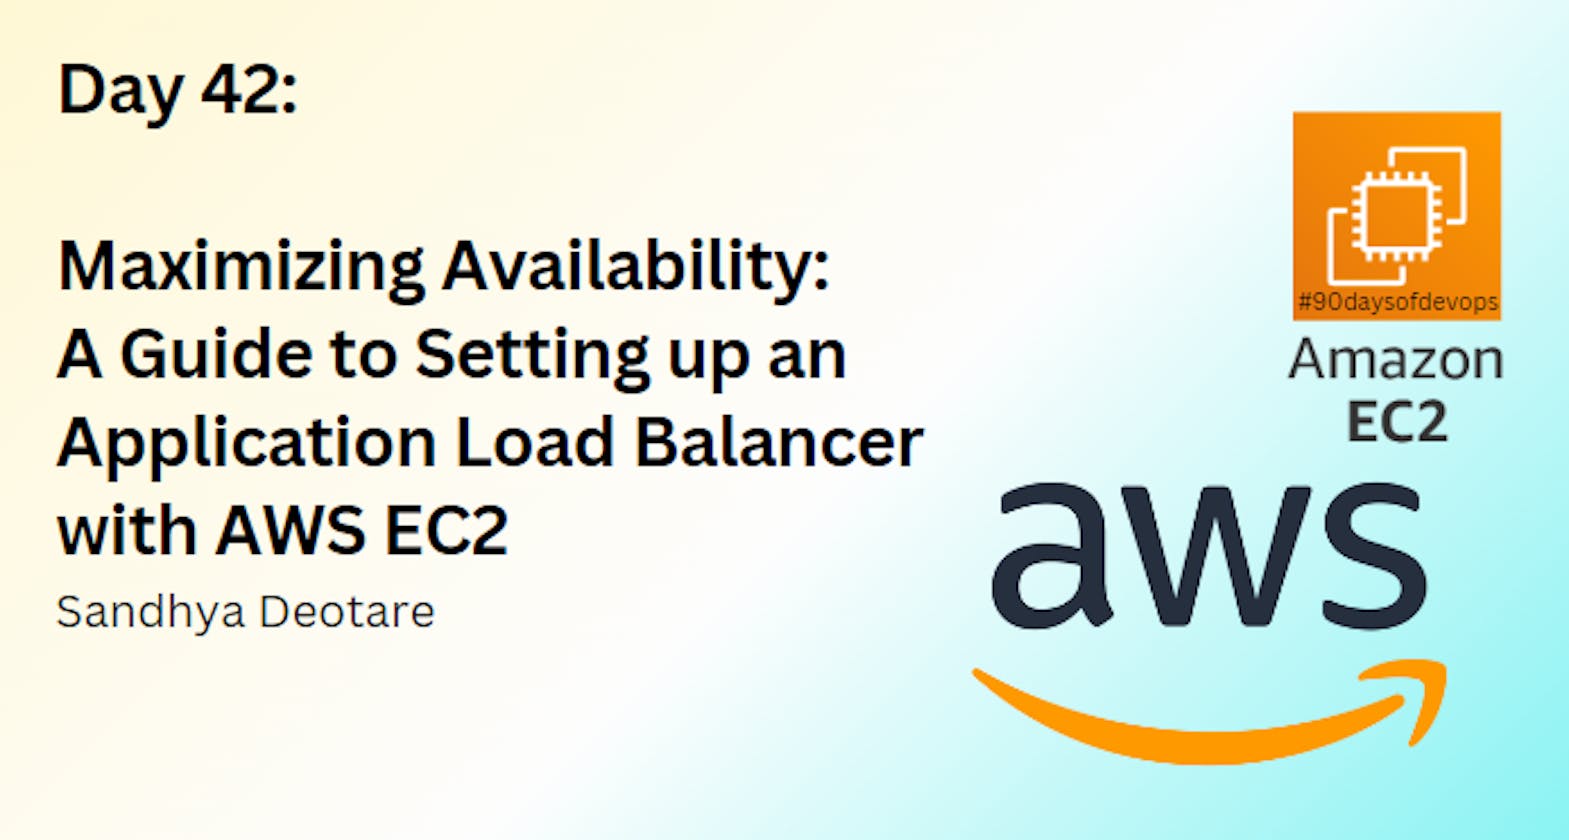 Maximizing Availability: A Guide to Setting up an Application Load Balancer with AWS EC2